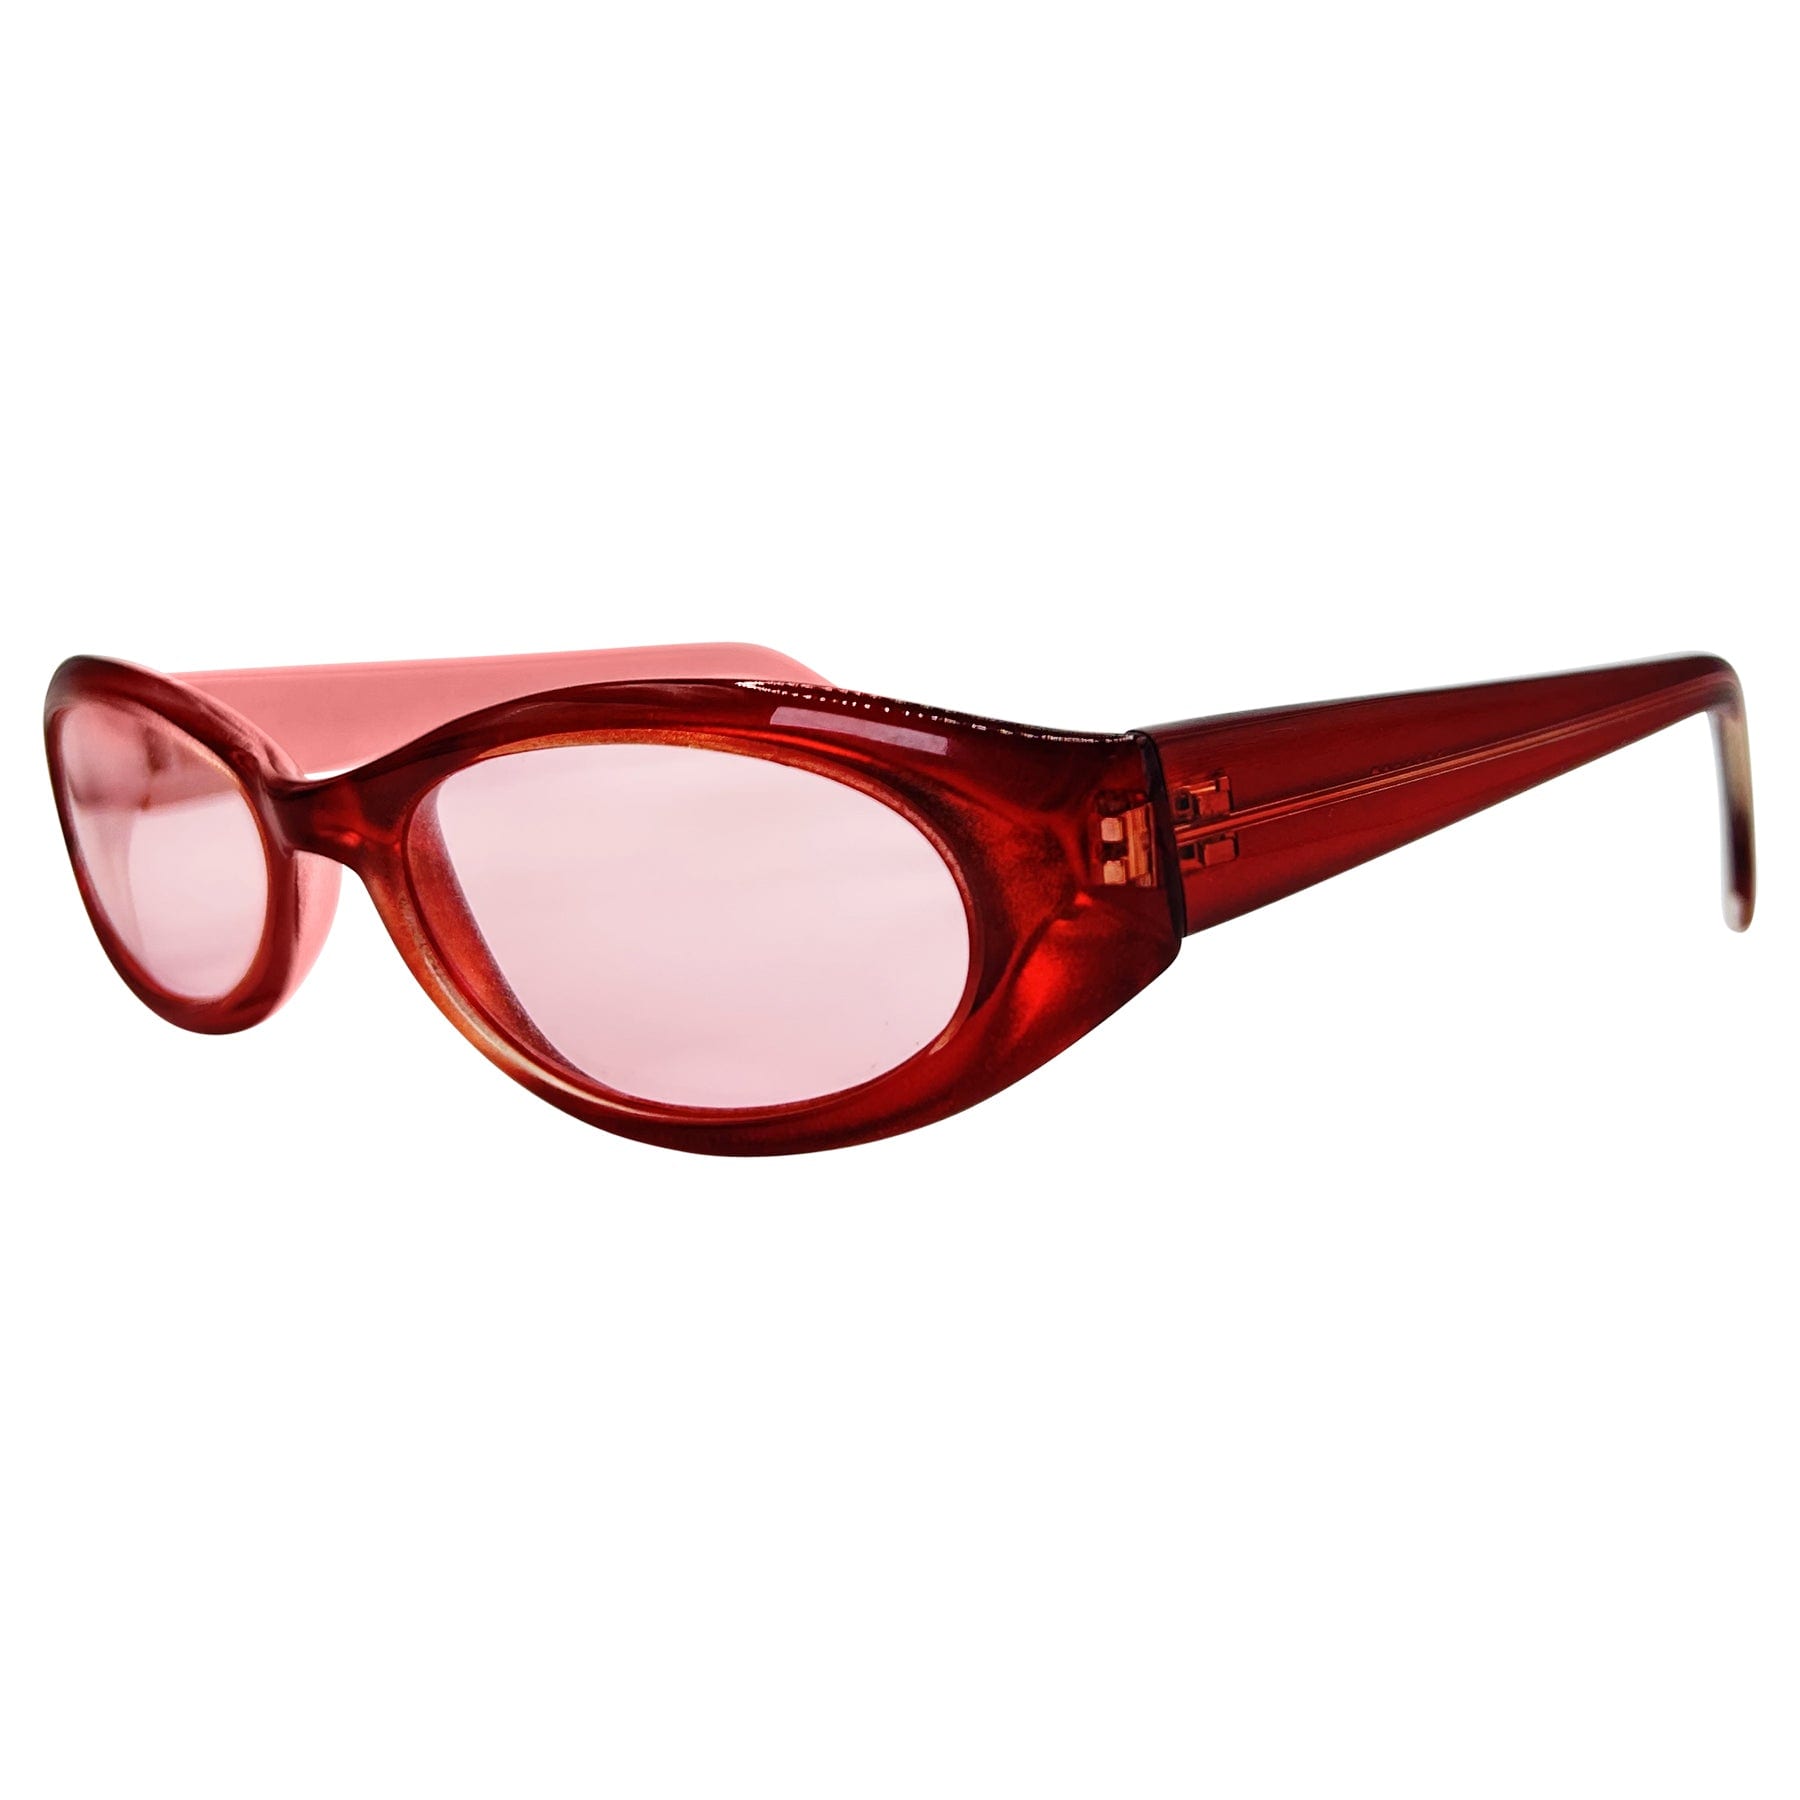 red sunglasses with a 90s retro style frame